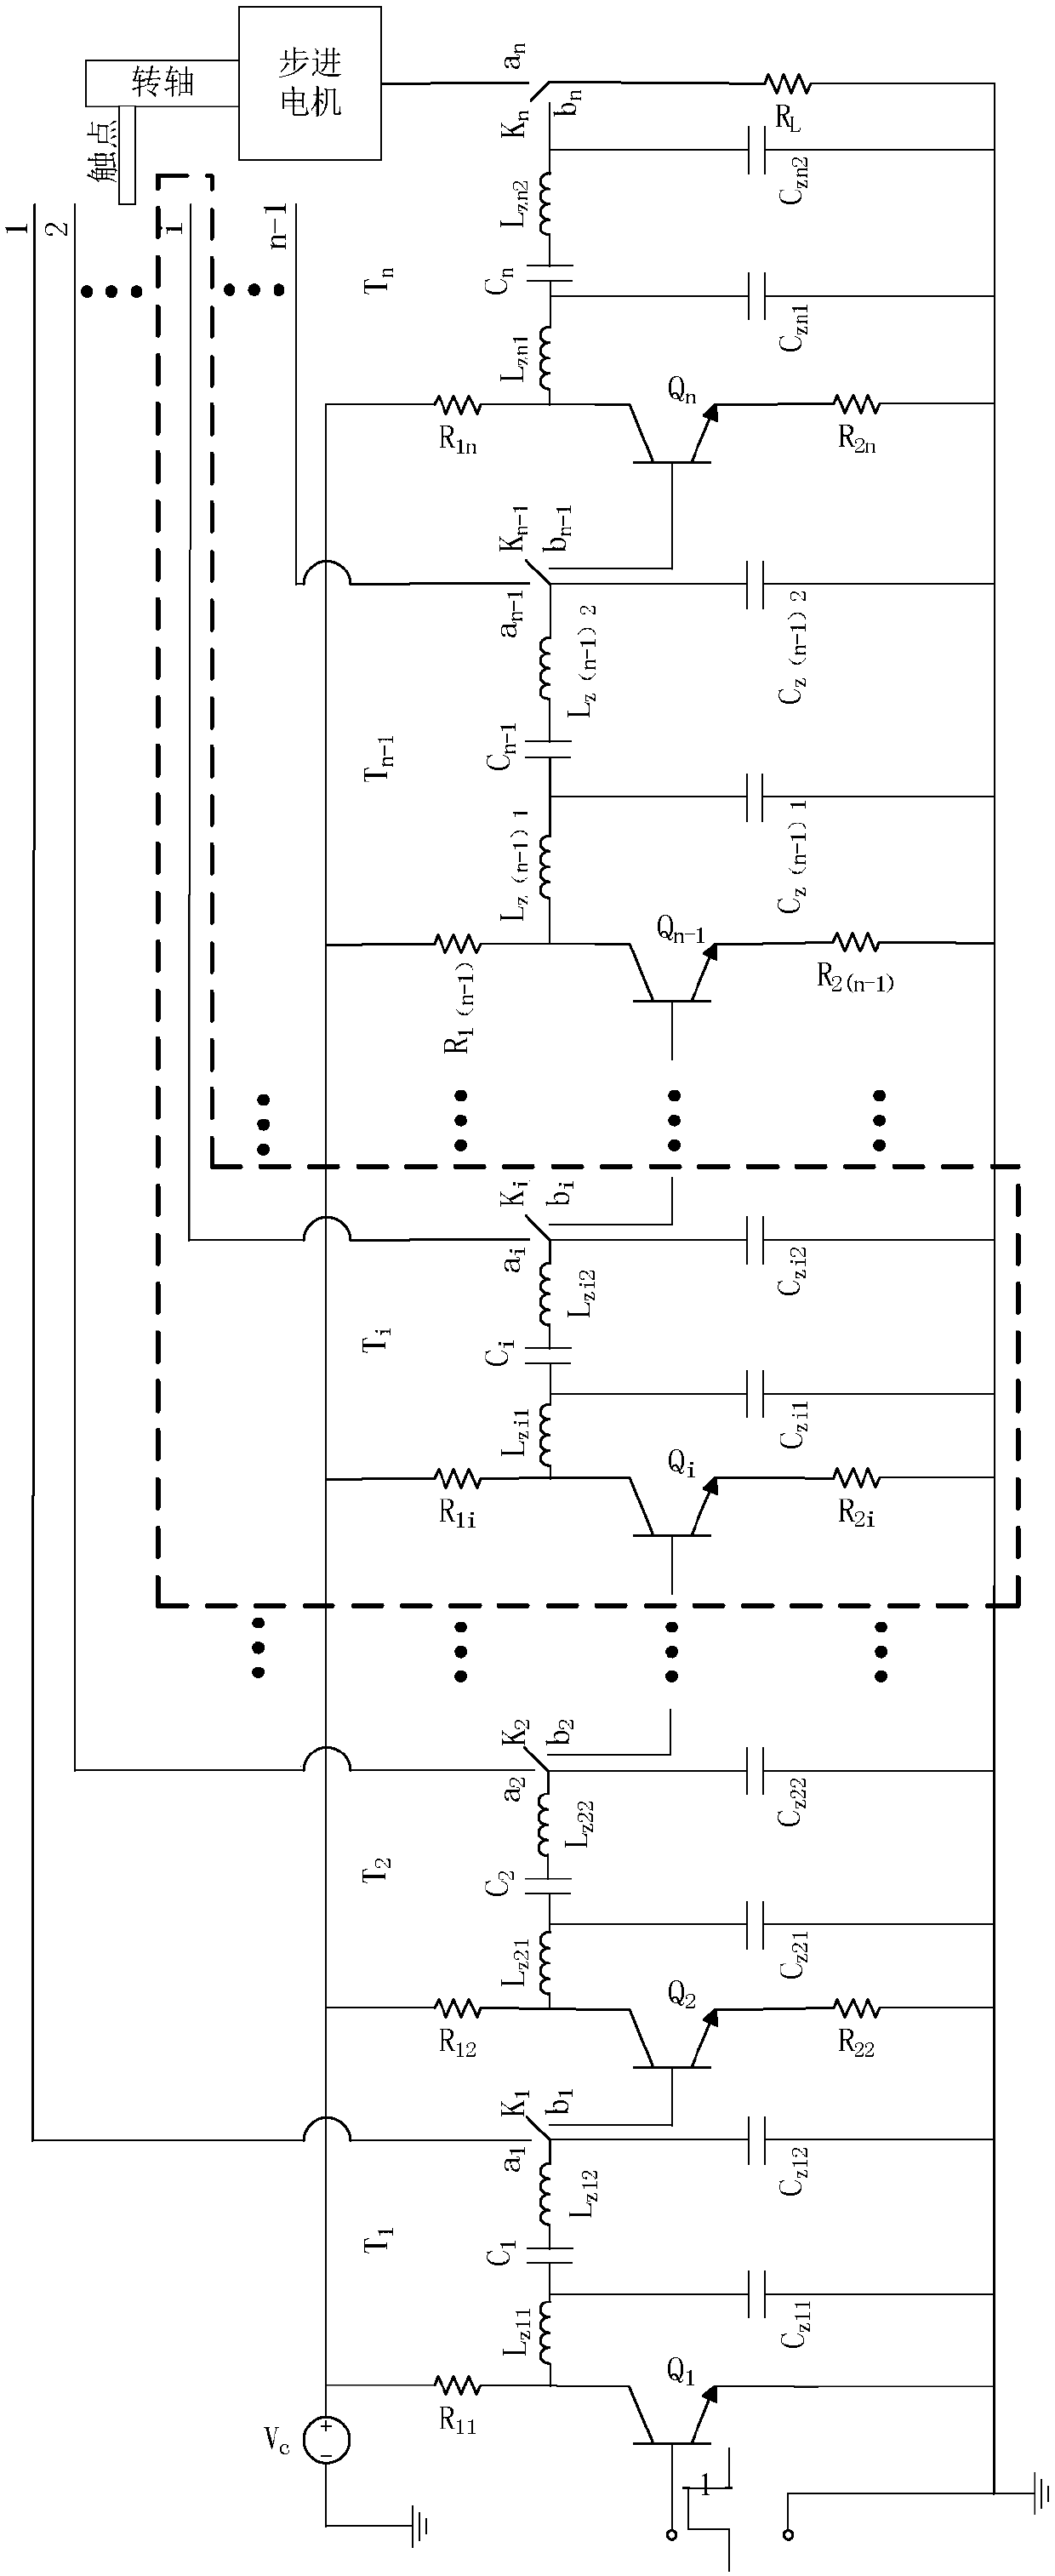 Avalanche triode marx circuit picosecond pulse generator based on microstrip transmission